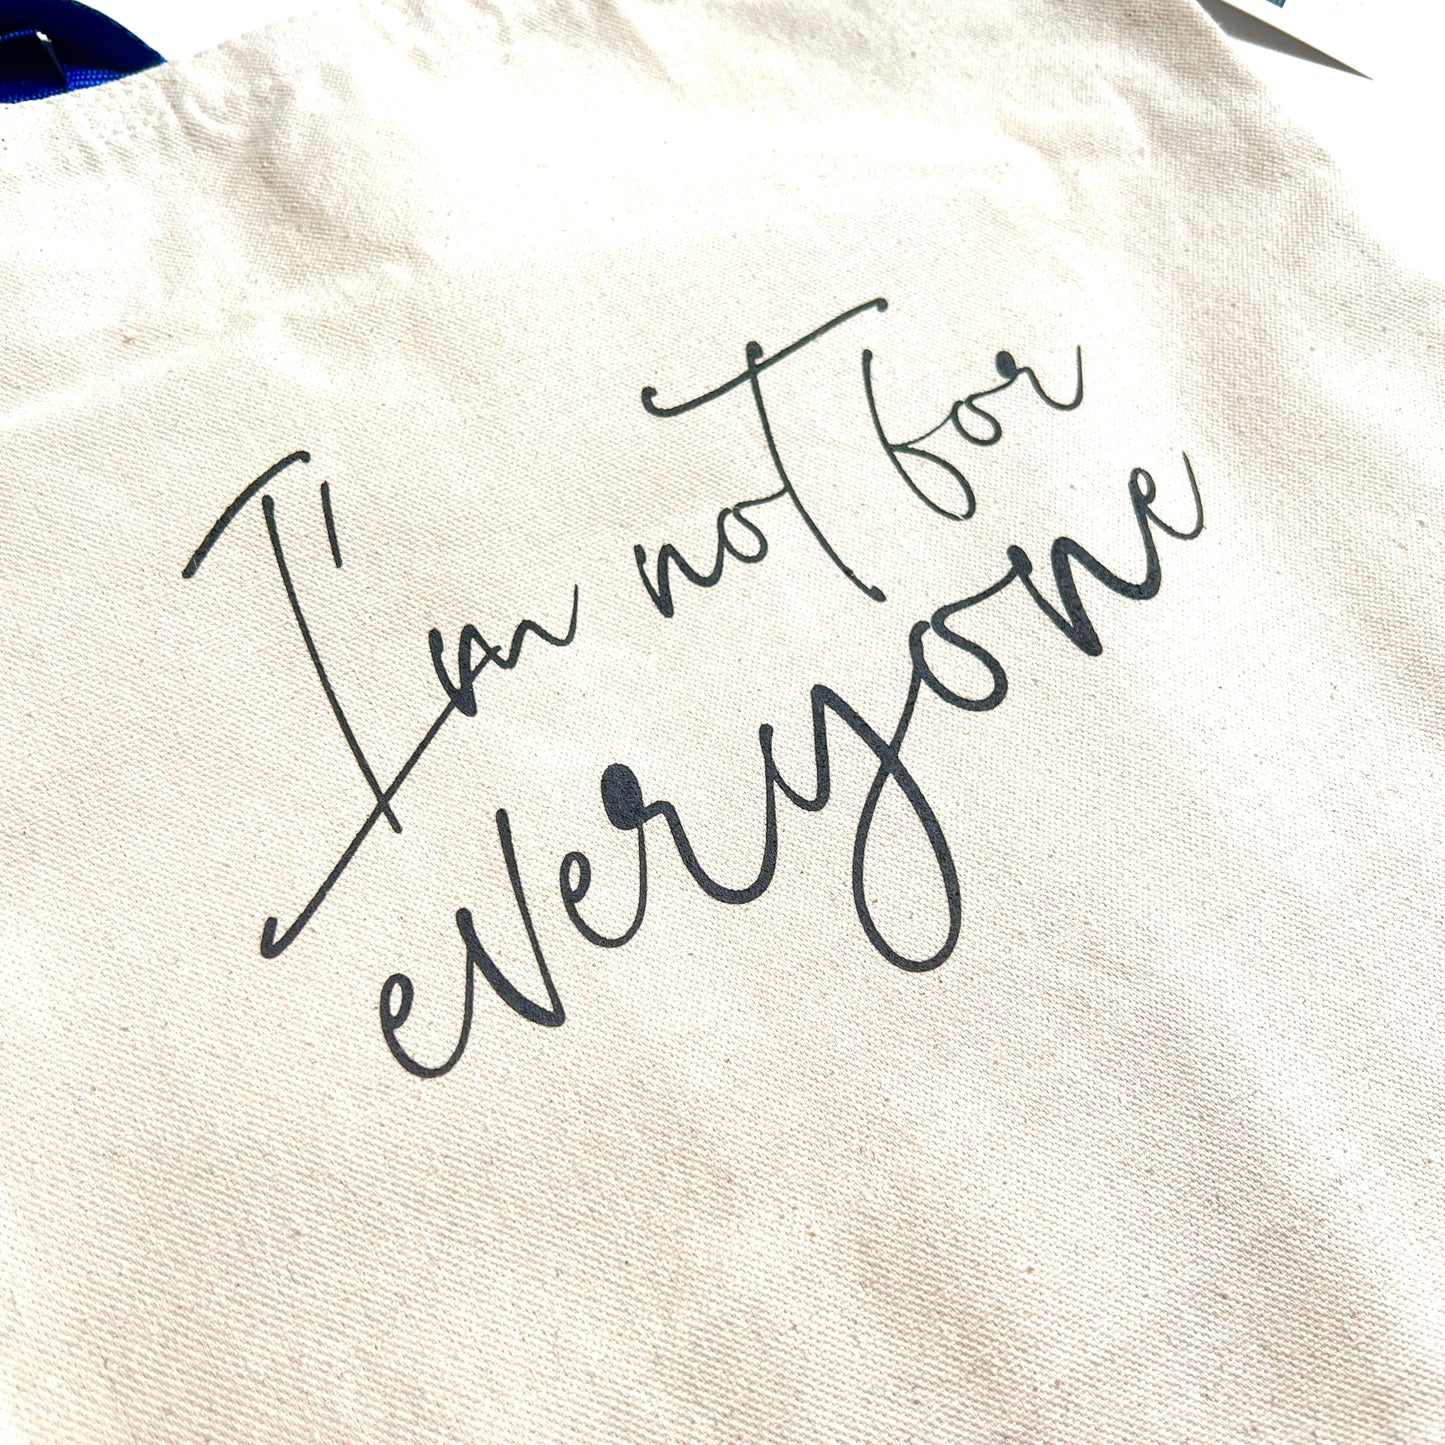 I’m Not For Everyone—Tote Bag